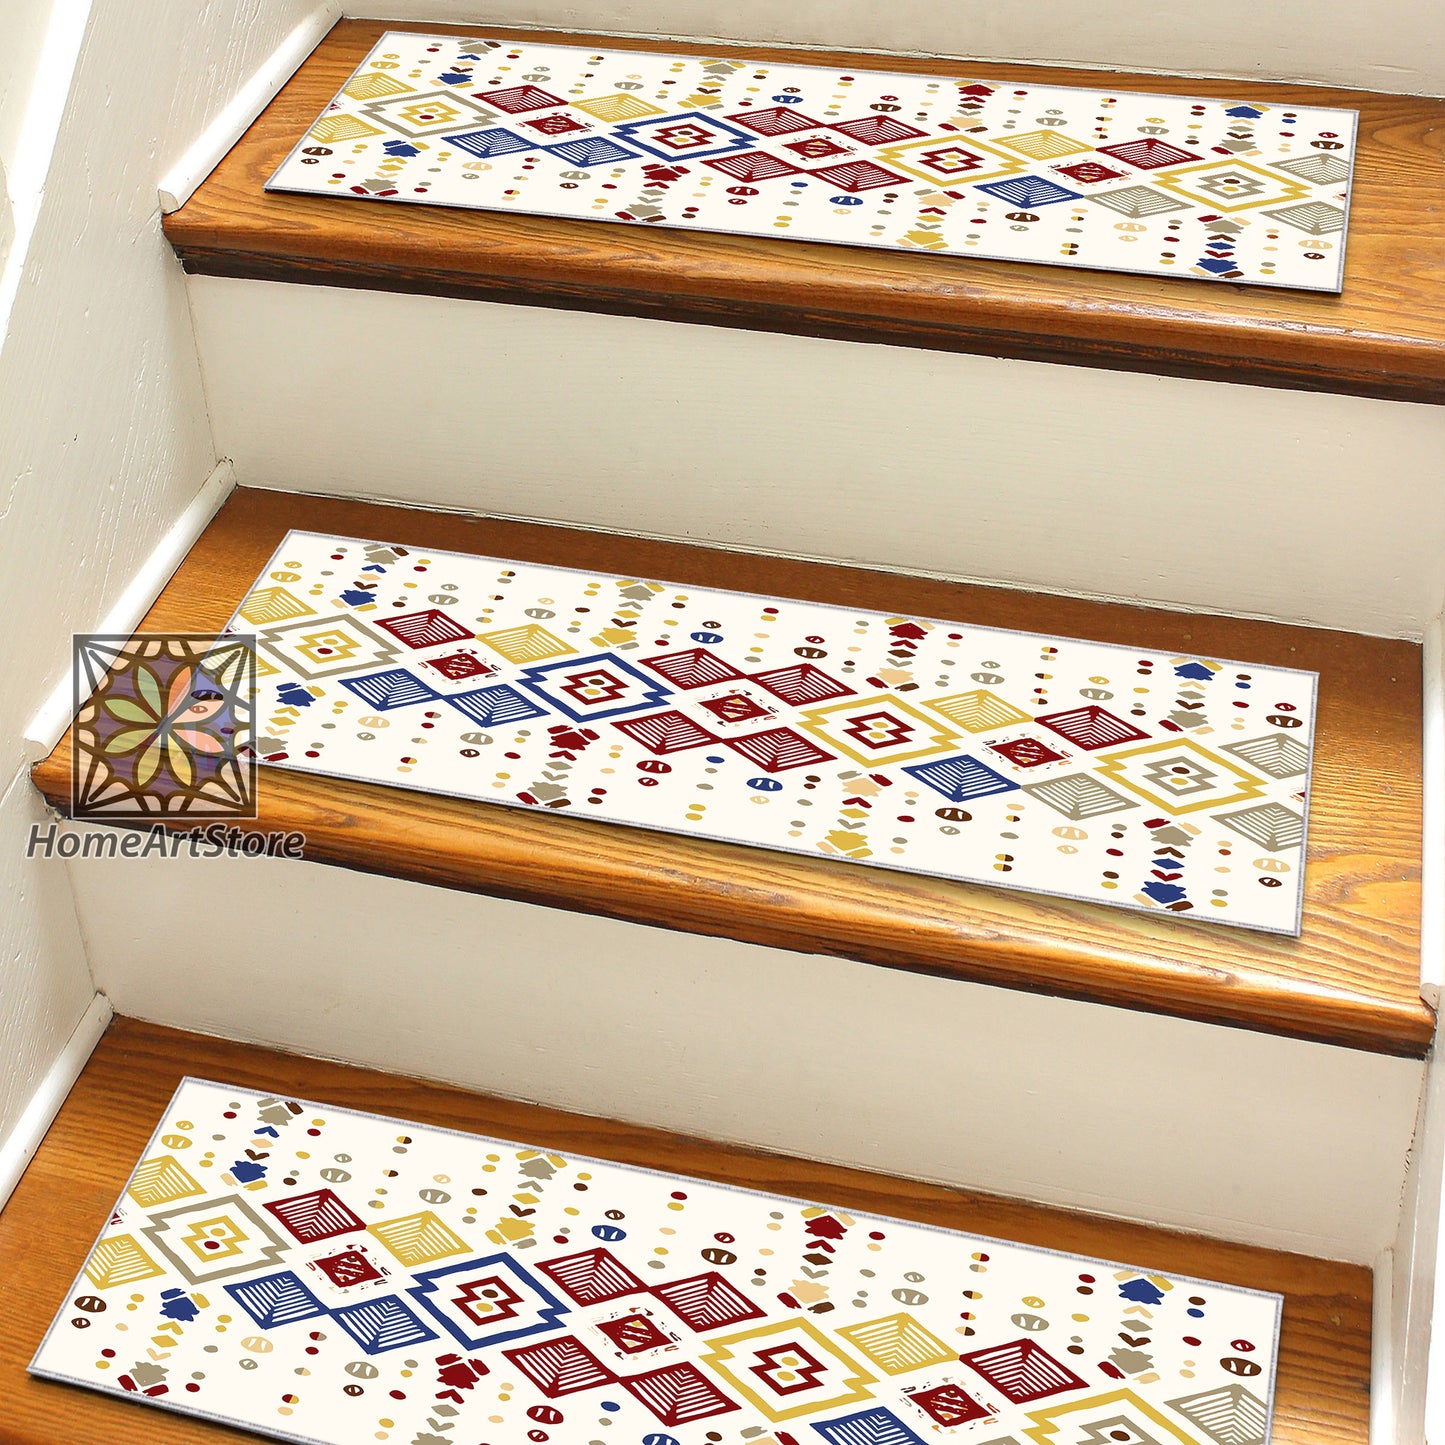 Colorful Scandinavian Stair Rugs, Ethnic Stair Step Mats, Bohemian Stair Decor, Washable Runner Rug